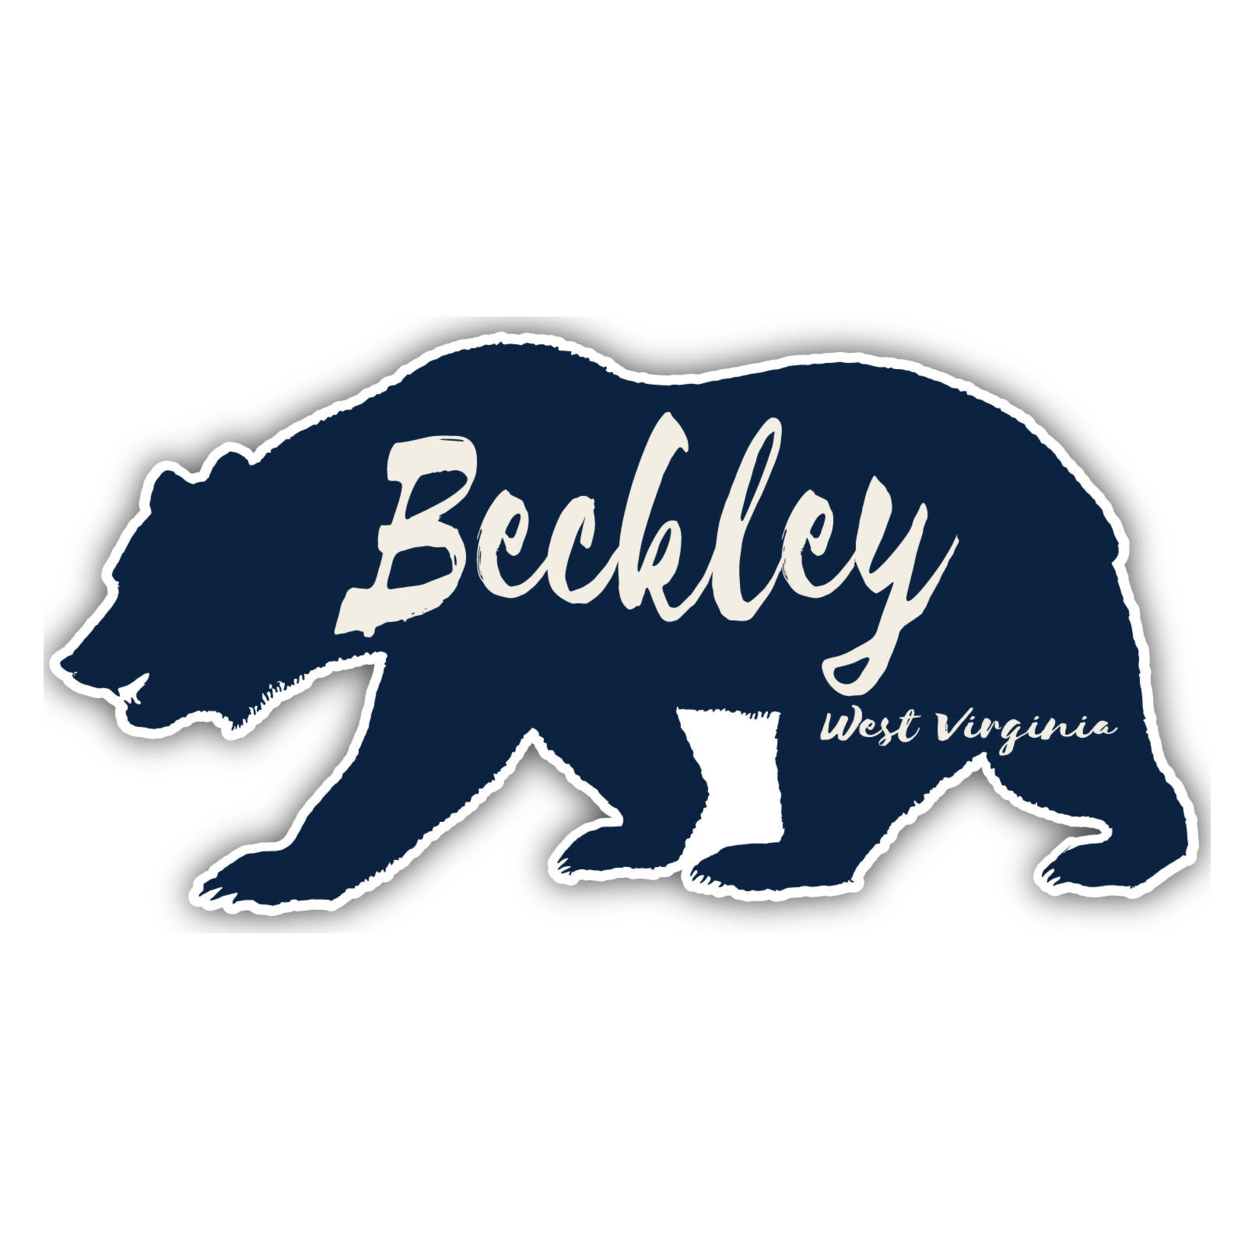 Beckley West Virginia Souvenir Decorative Stickers (Choose Theme And Size) - 4-Pack, 10-Inch, Adventures Awaits